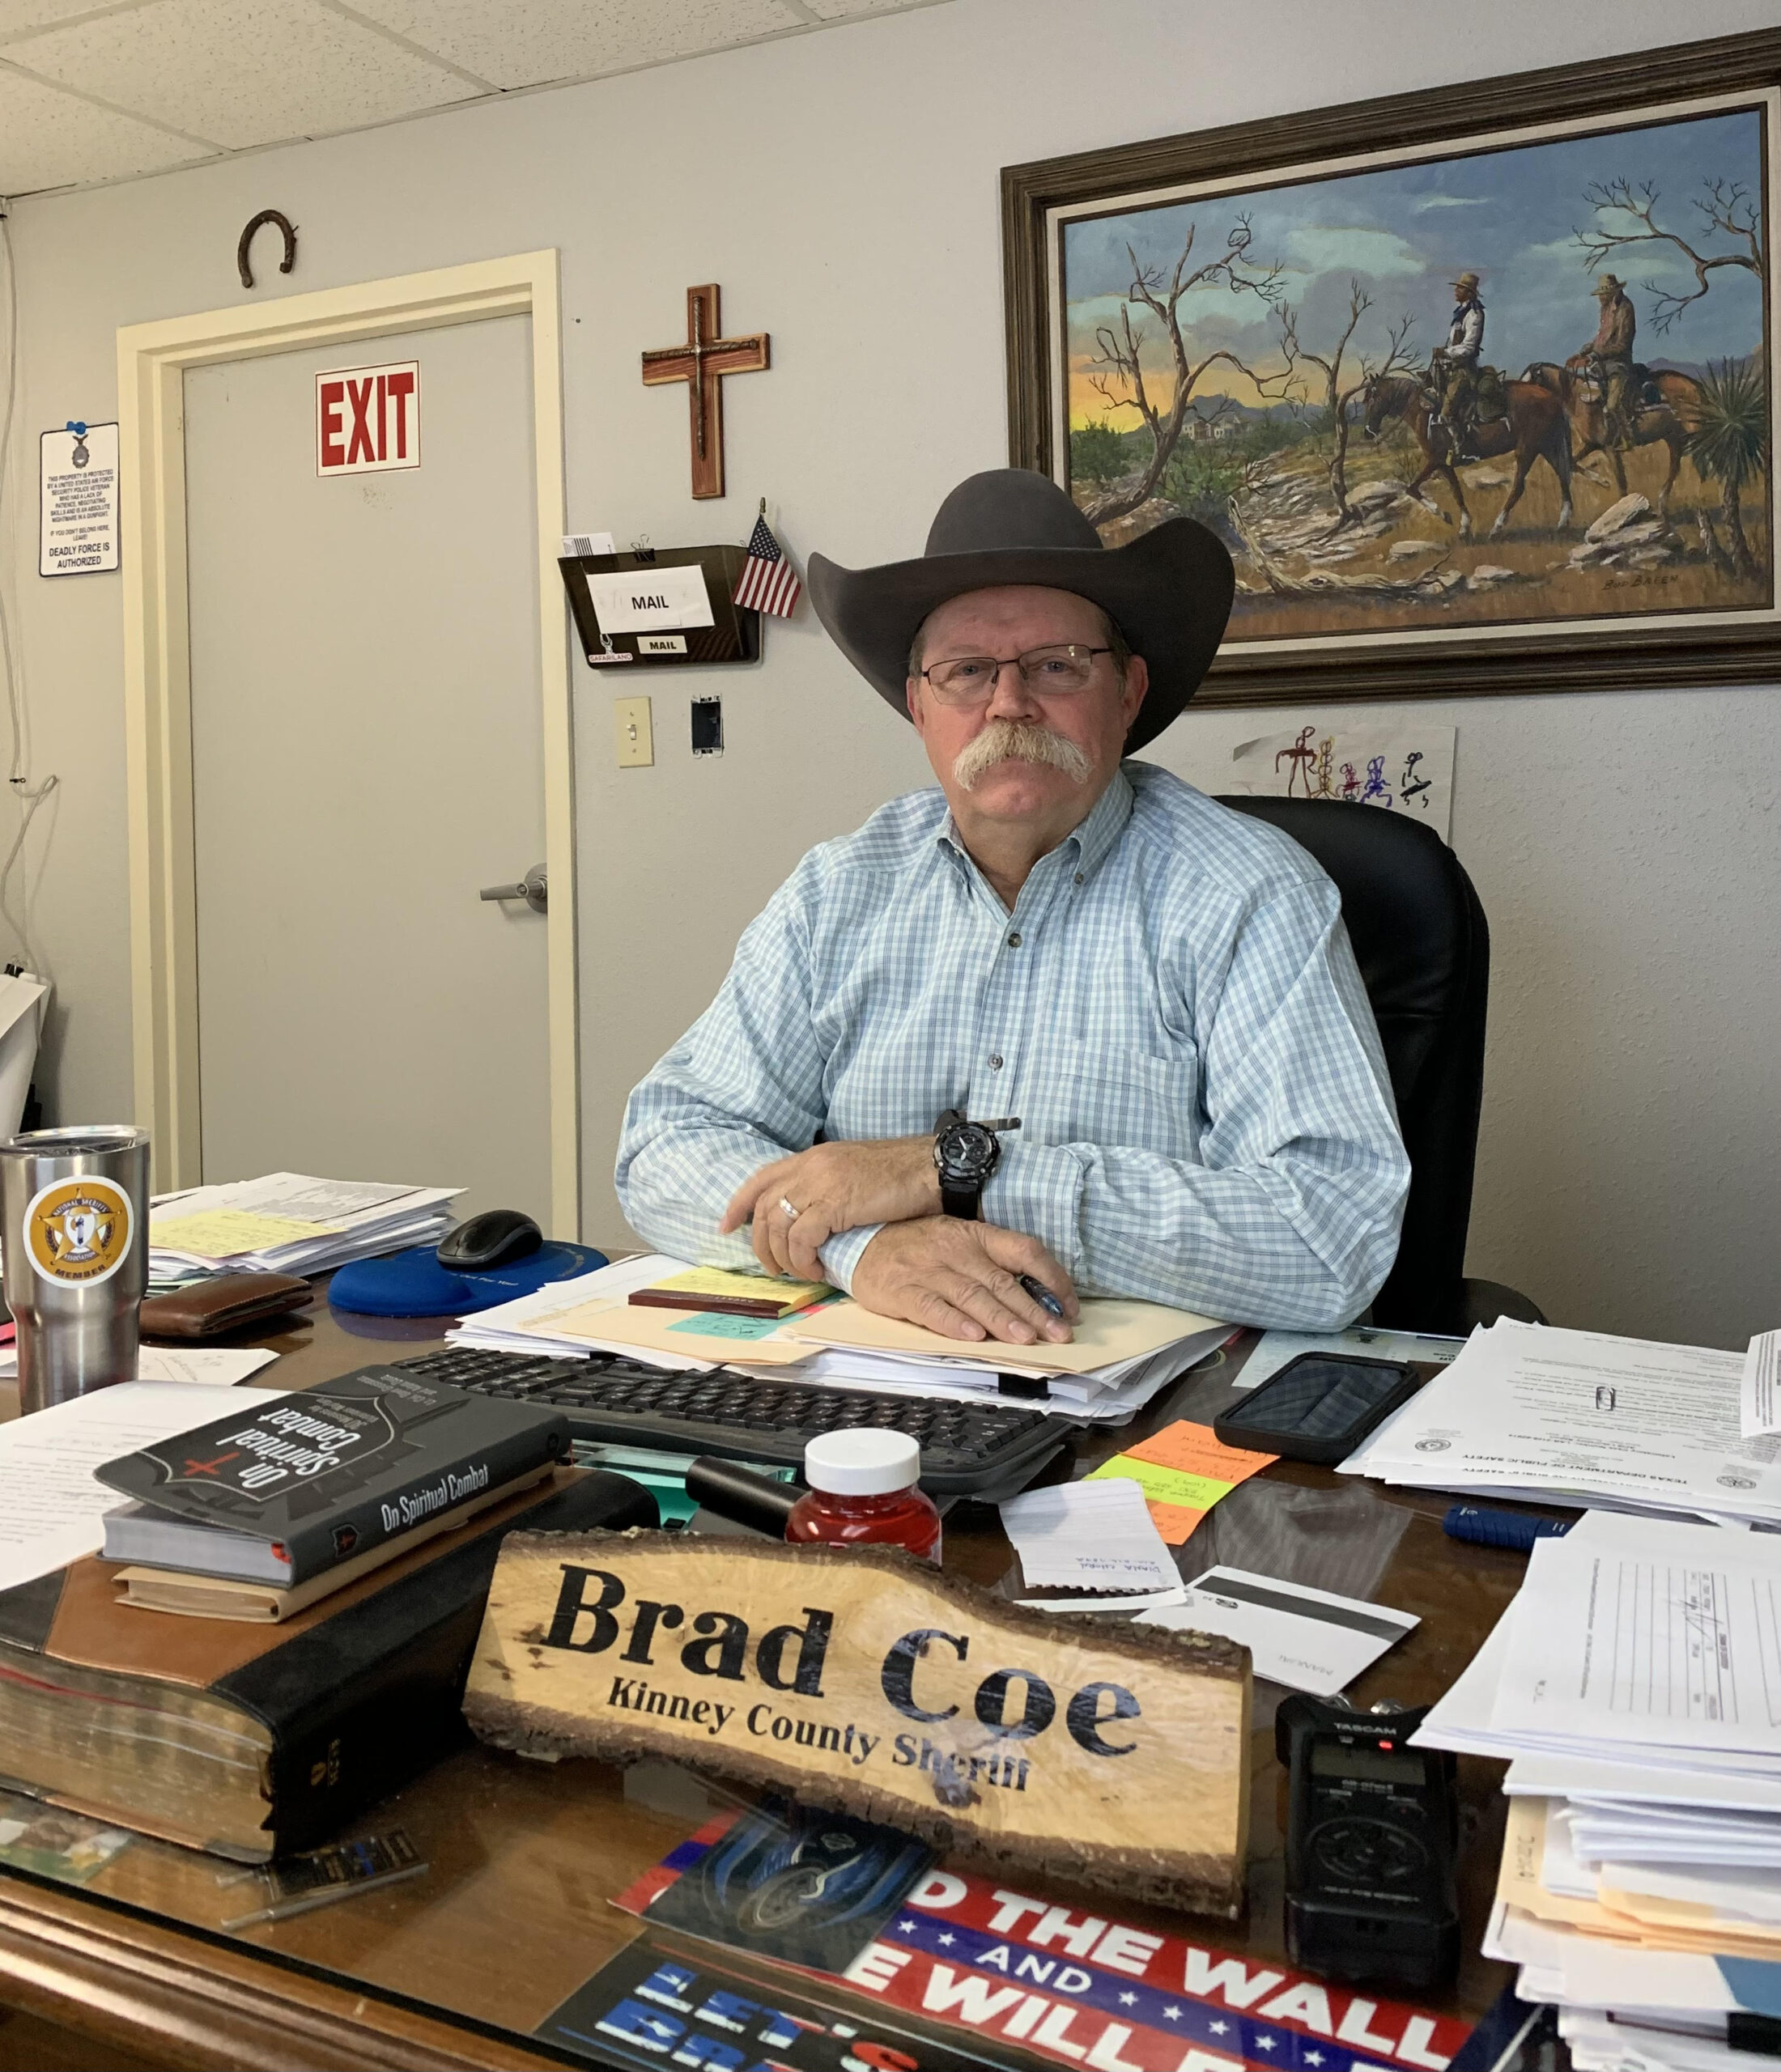 Sheriff Brad Coe sits behind a large nameplate at his desk in his office. He wears a cowboy hat and there is a cross on his wall.